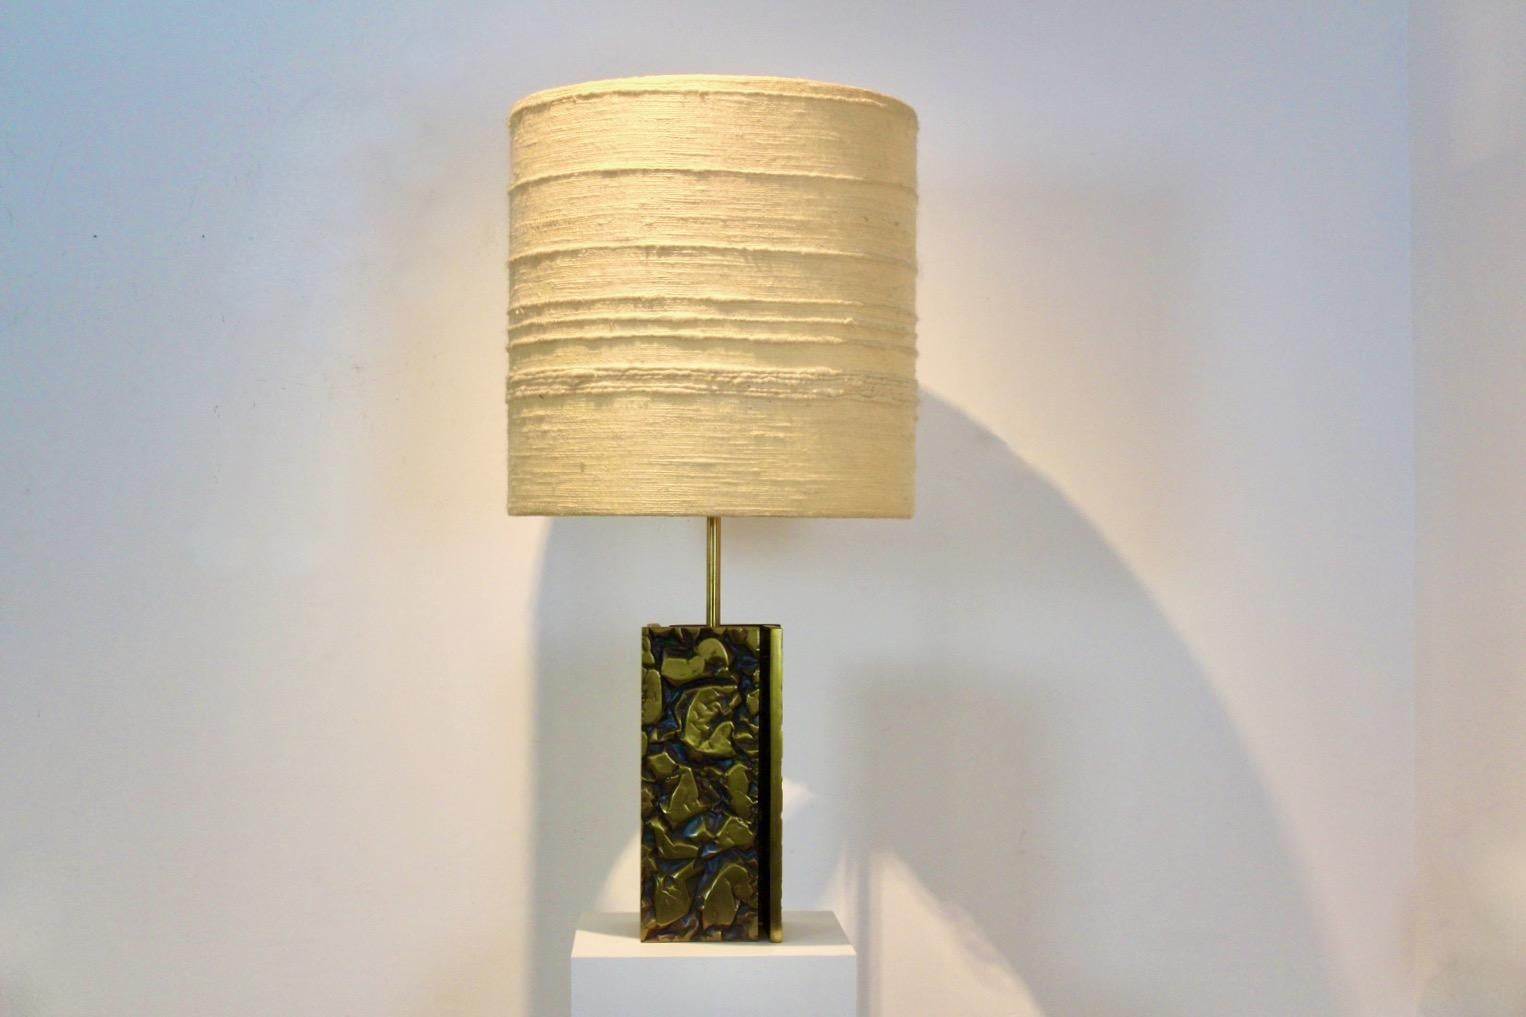 Expressive Brutalist Table lamp made in France in the 1970s. Beautiful Heavy and Large lamp base with Bold Abstract Brass Sculptured accents. Comes with a matching original Raw Woolen structured shade. Completely fine original version. Very good